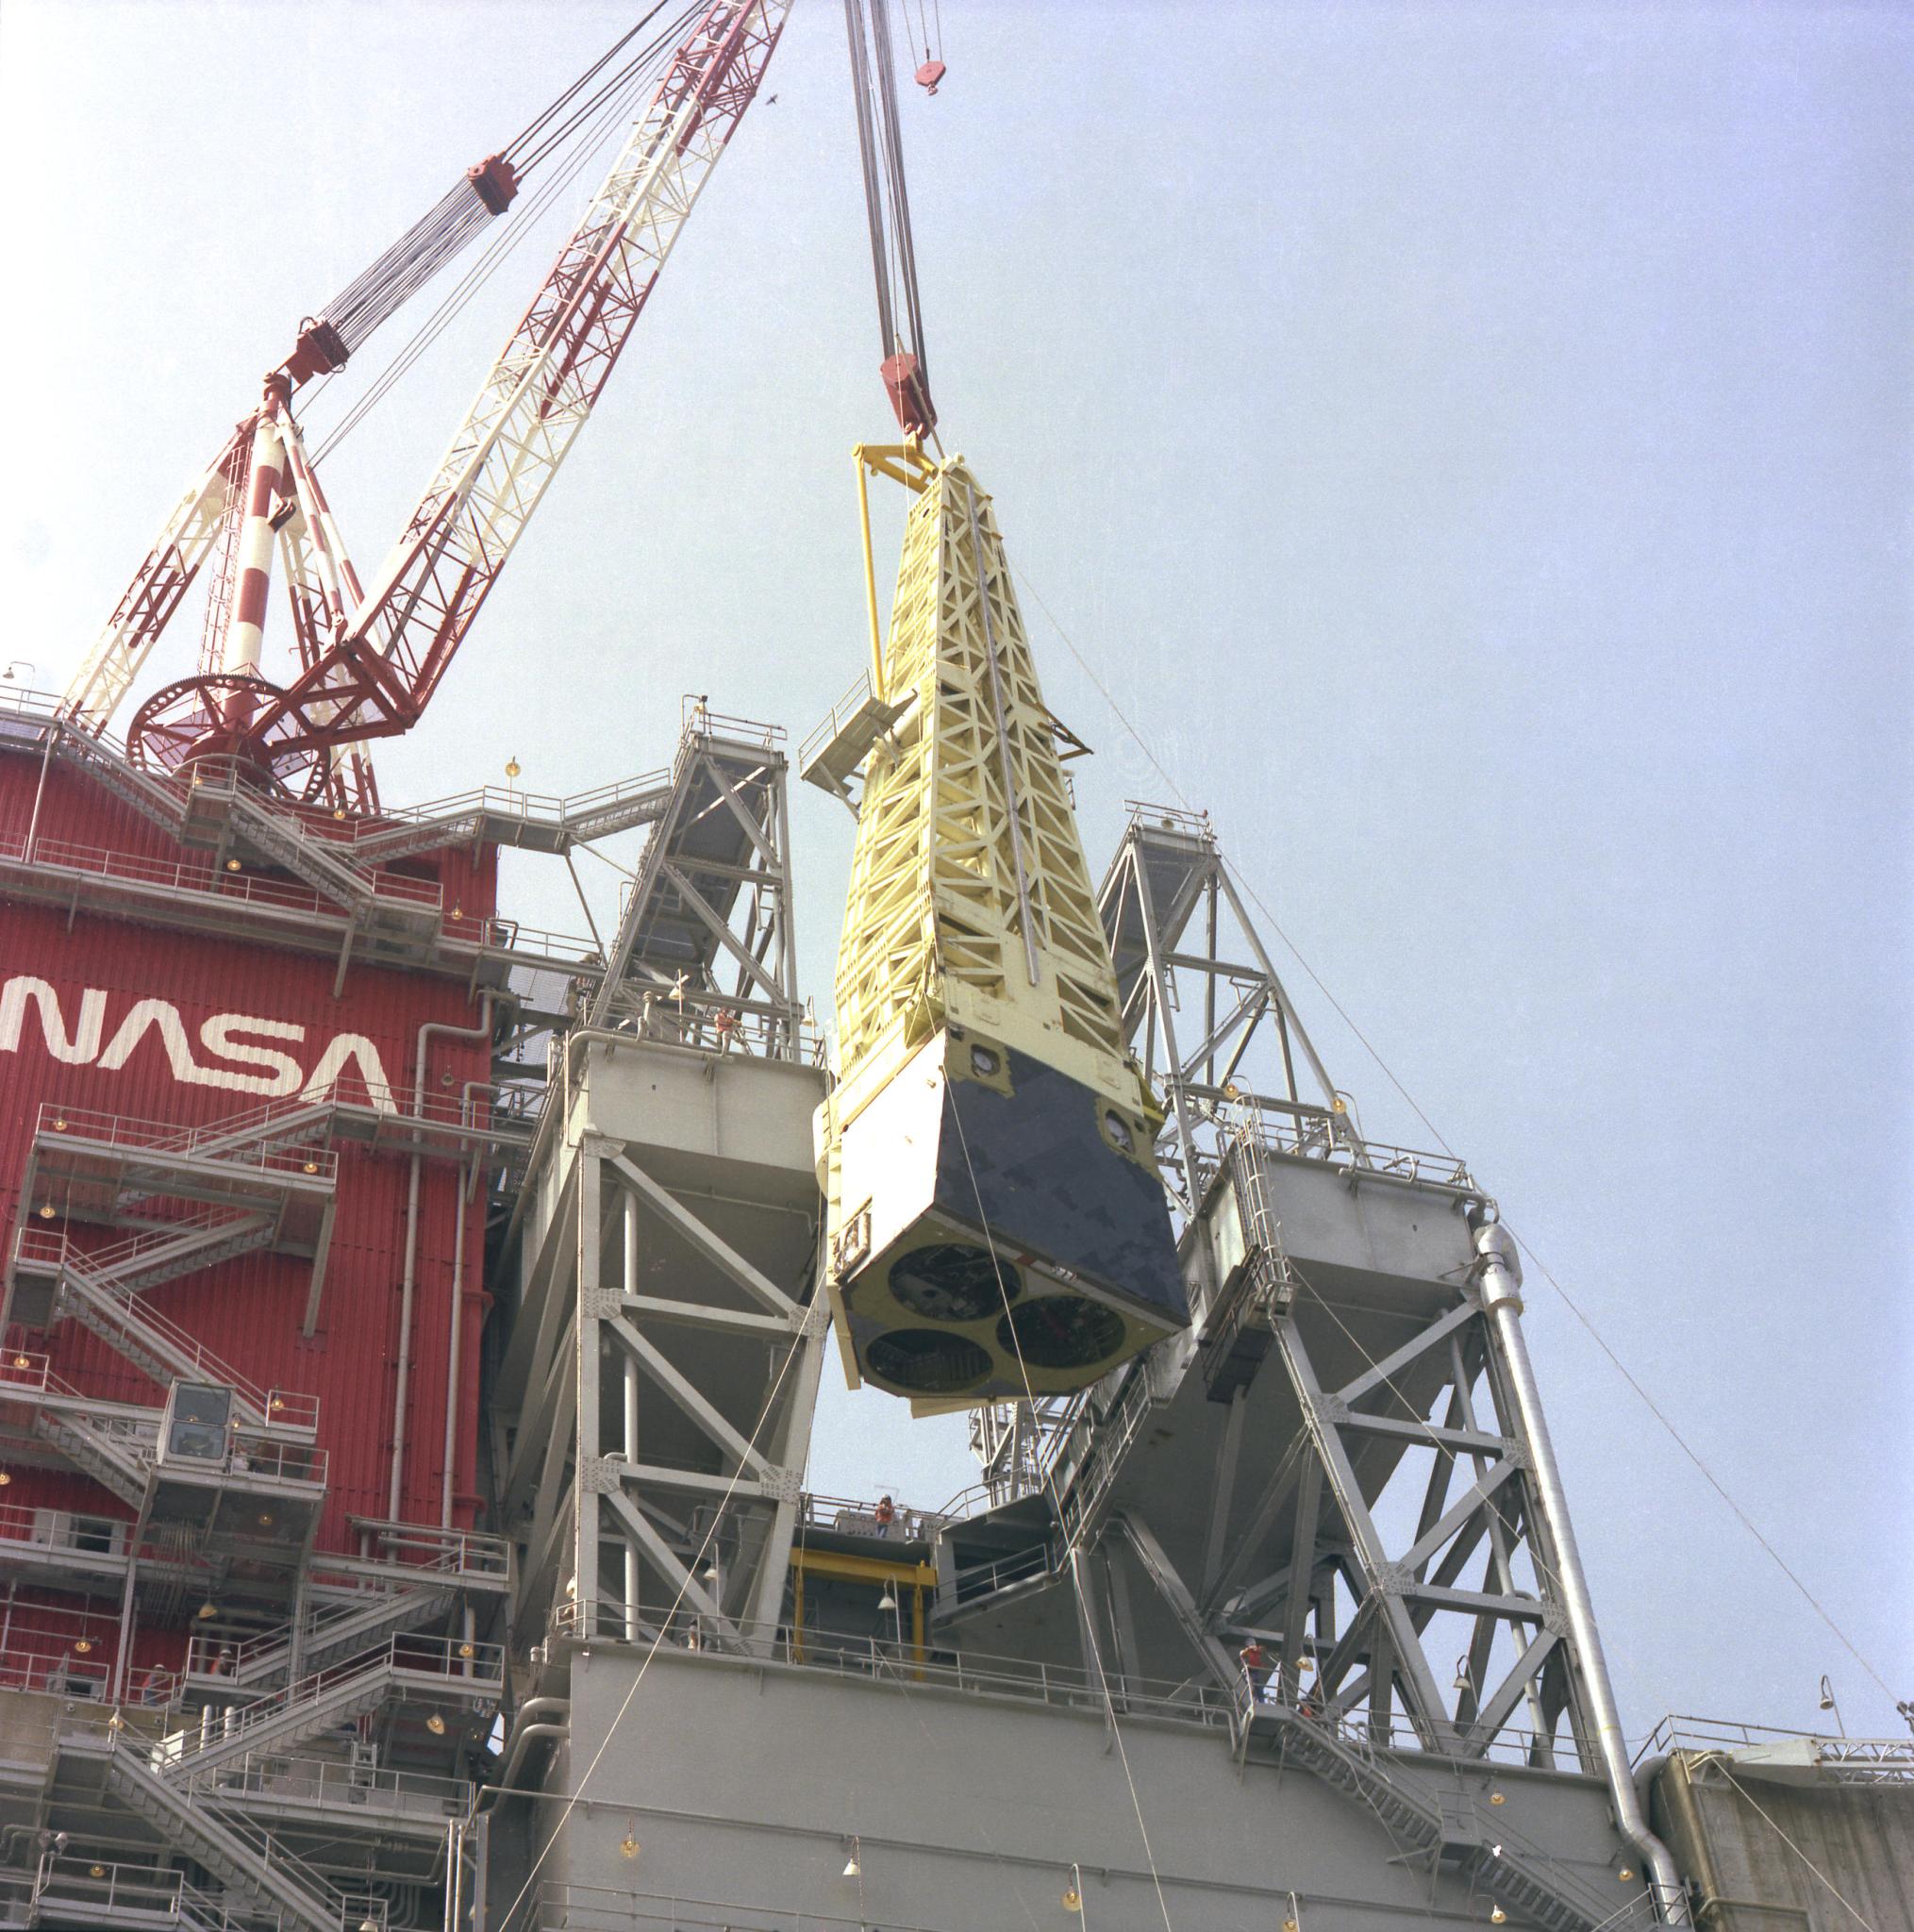 A space shuttle main propulsion test article (MPTA) component is lifted onto the B-2 Test Stand at NASA’s Stennis Space Center, then known as National Space Technology Laboratories, in this 1977 photo.